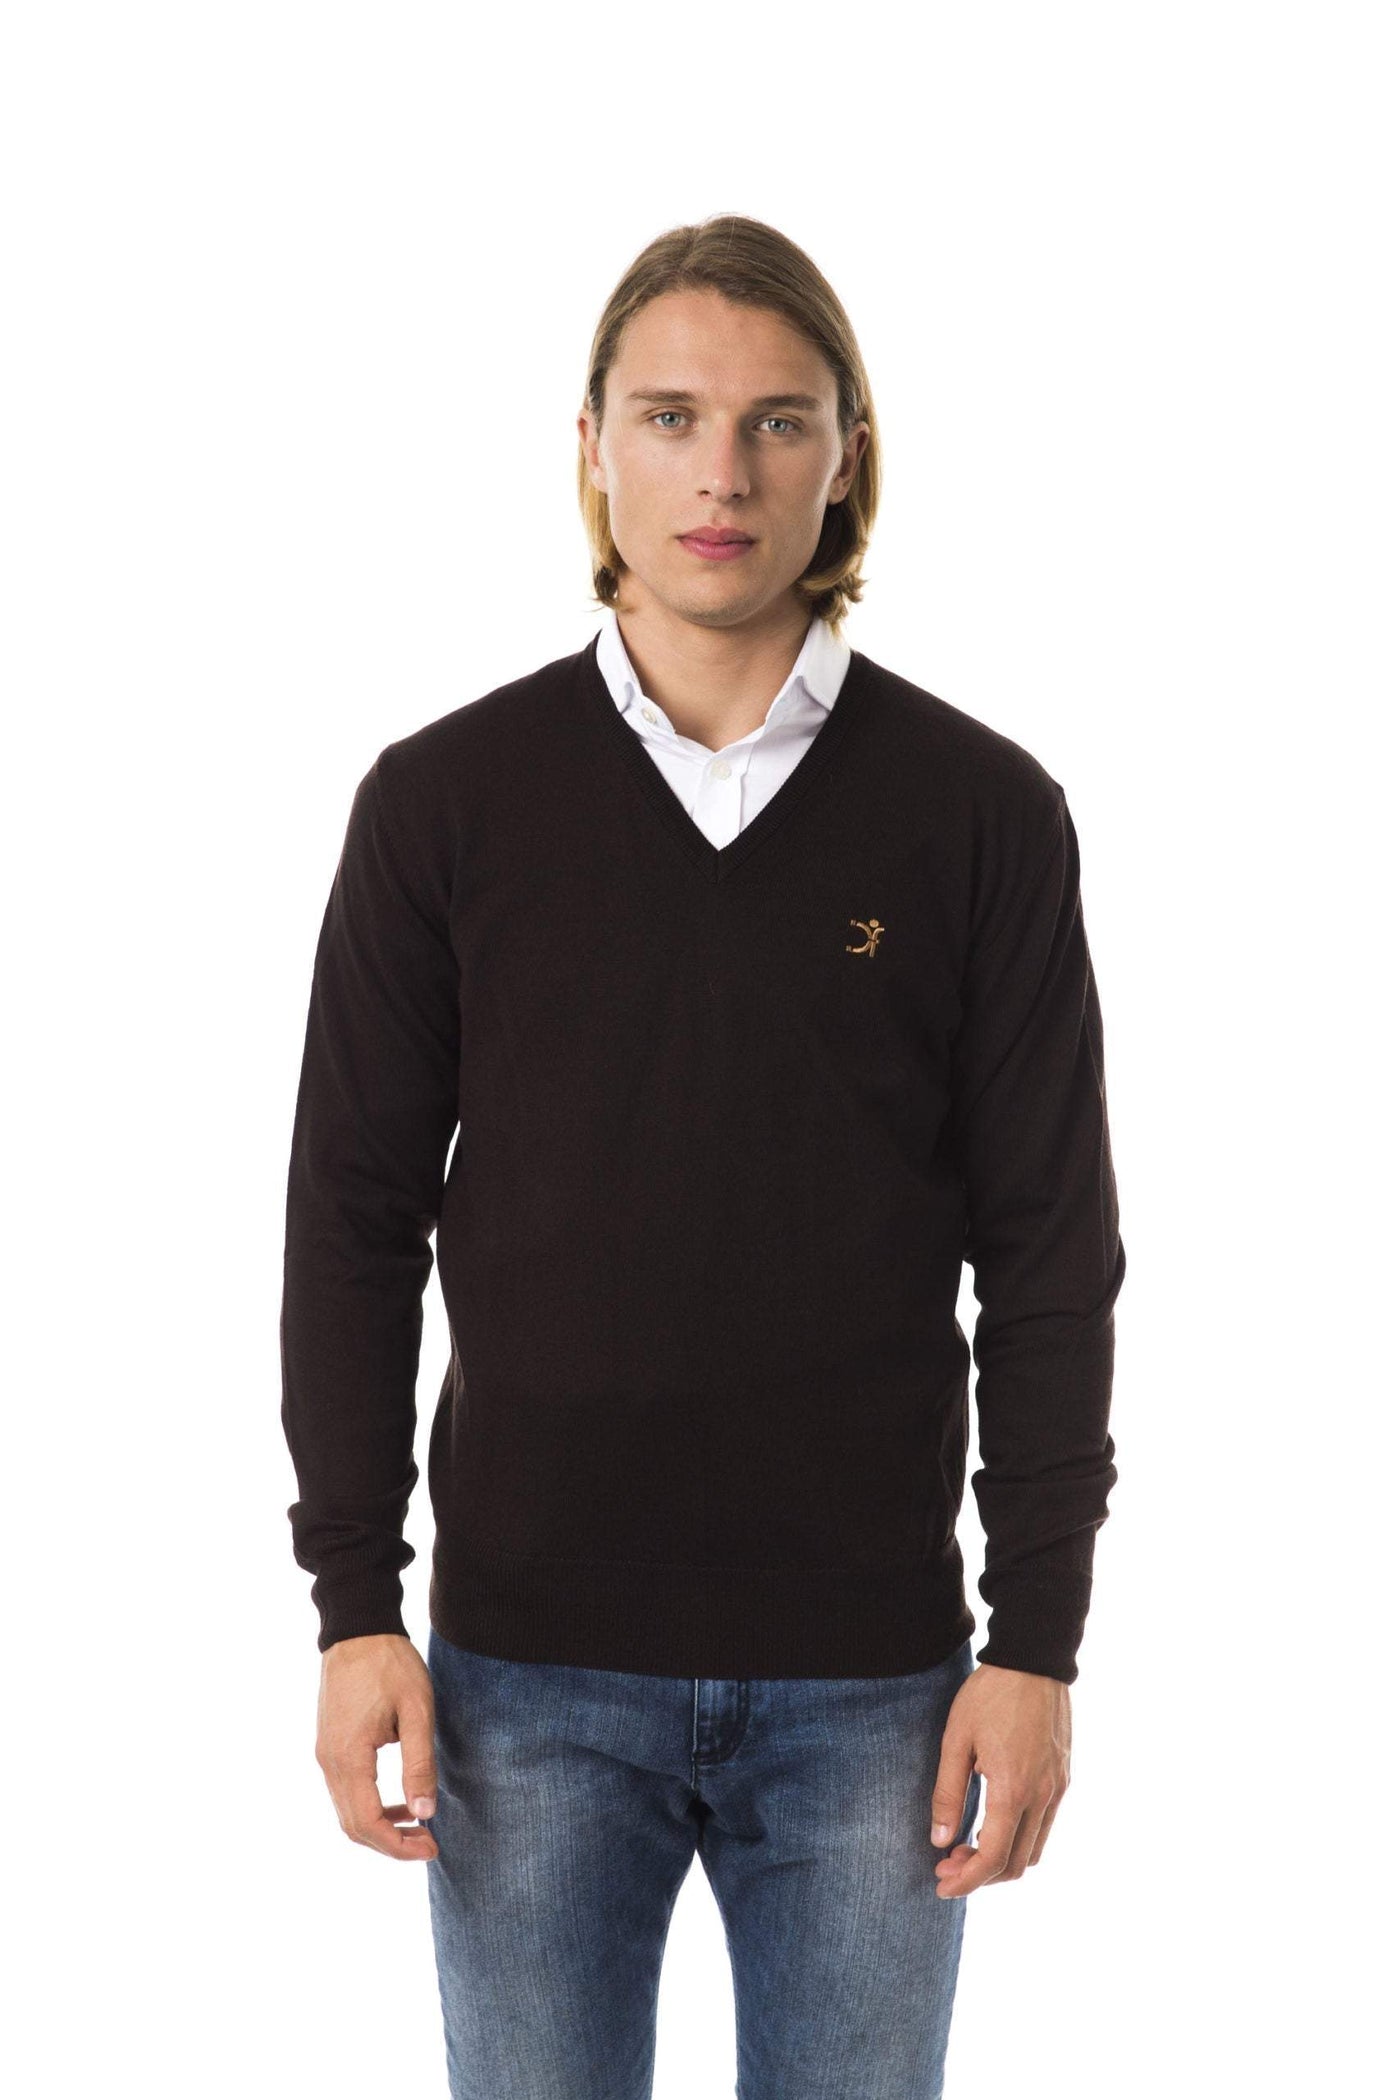 Uominitaliani v-neck emroidered Sweater #men, Brown, feed-color-Brown, feed-gender-adult, feed-gender-male, L, M, S, Sweaters - Men - Clothing, Uominitaliani, XL, XXL at SEYMAYKA